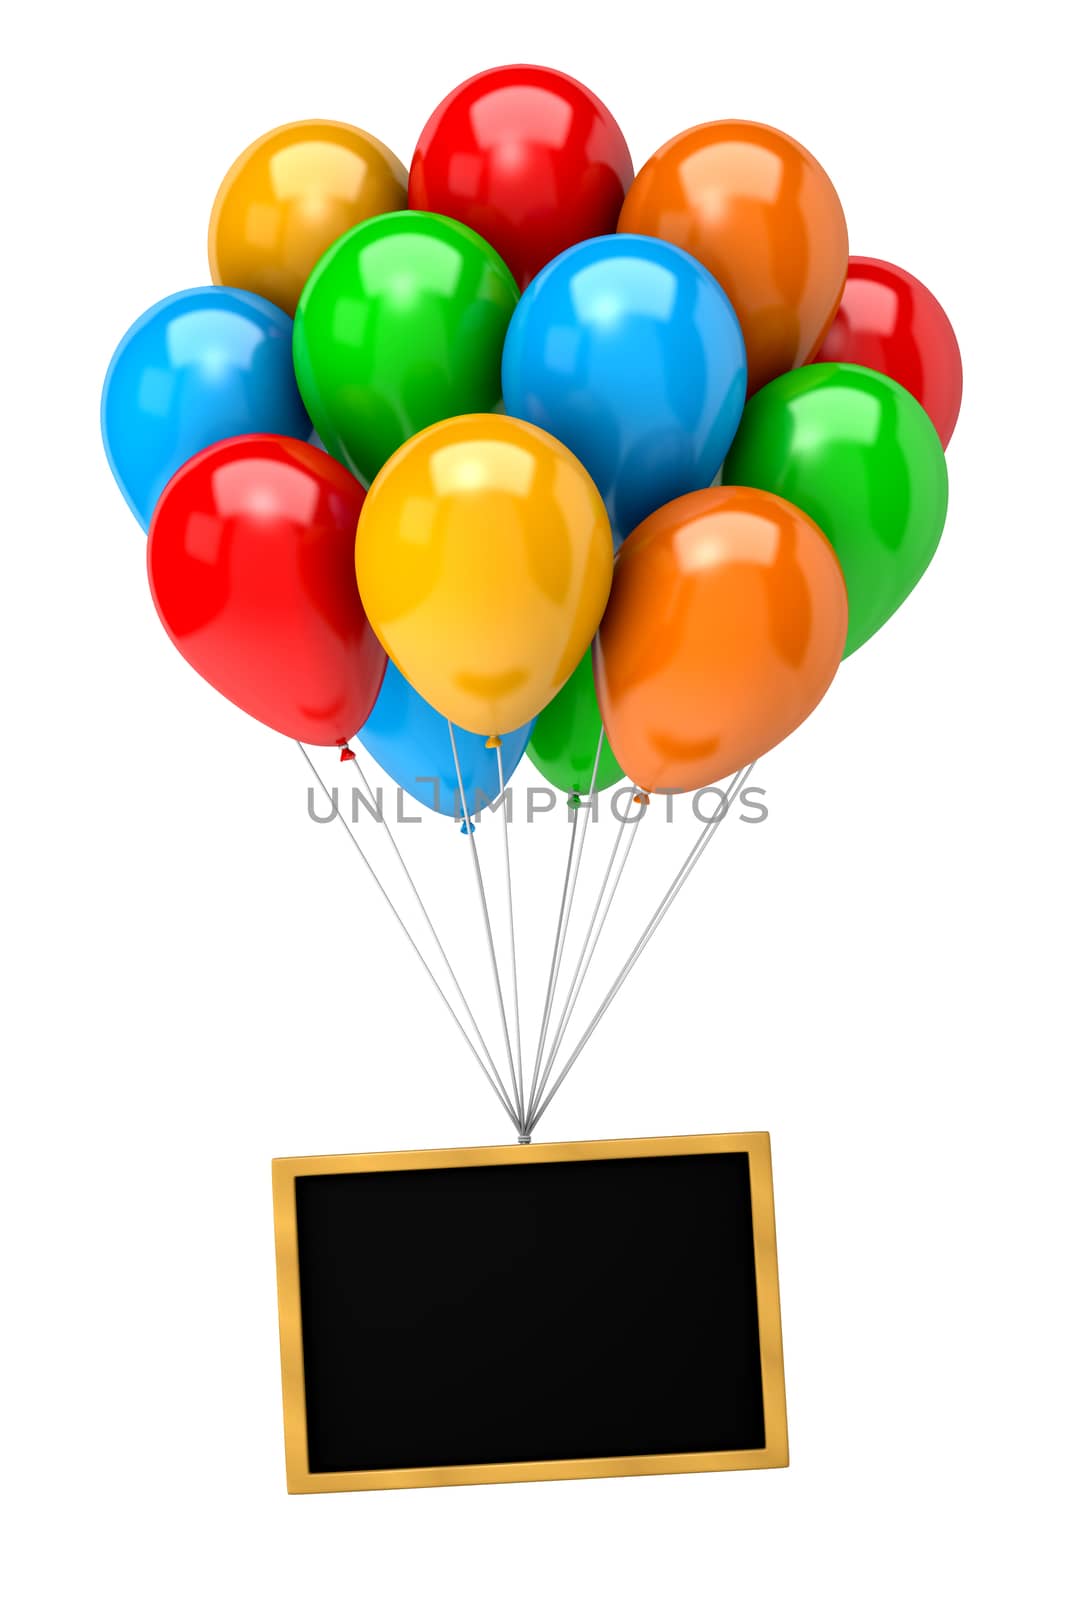 Bunch of Balloons Holding Up a Blank Chalkboard by make